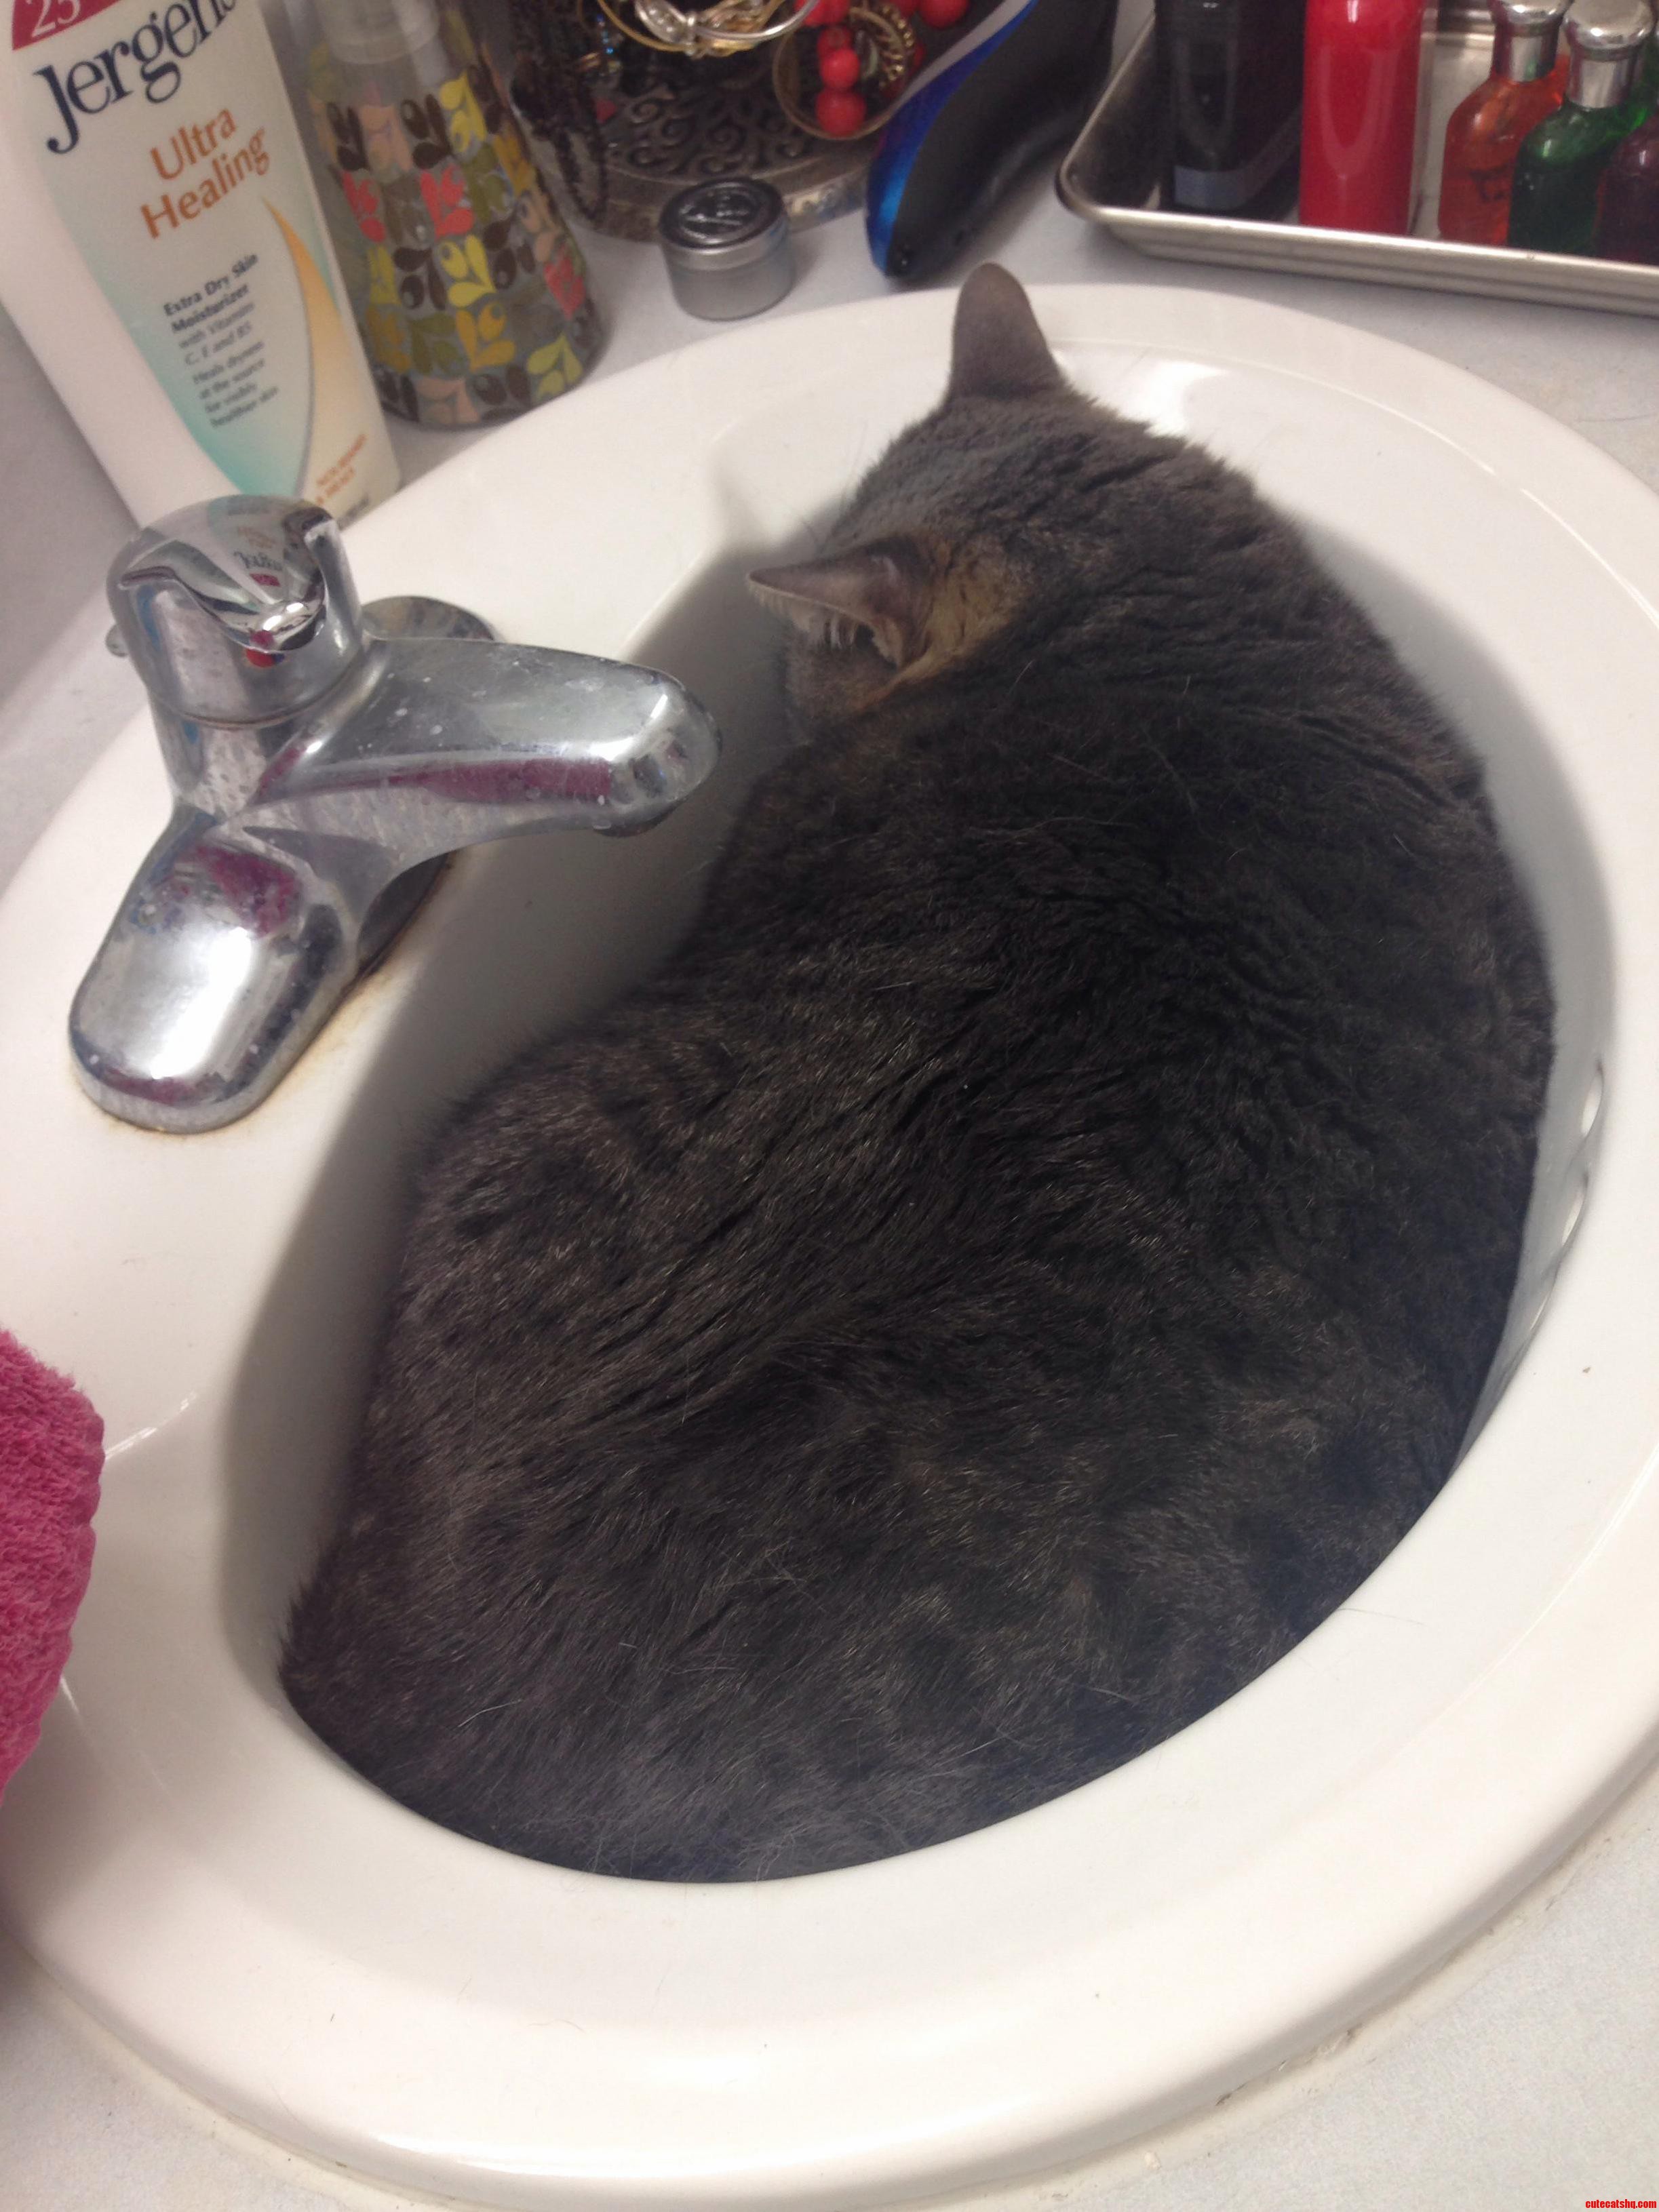 Dear Obese-Cat-In-Sink I Am Amazed My 18 Pounder Fits Better Than You. Maybe Its A Deeper Sink.